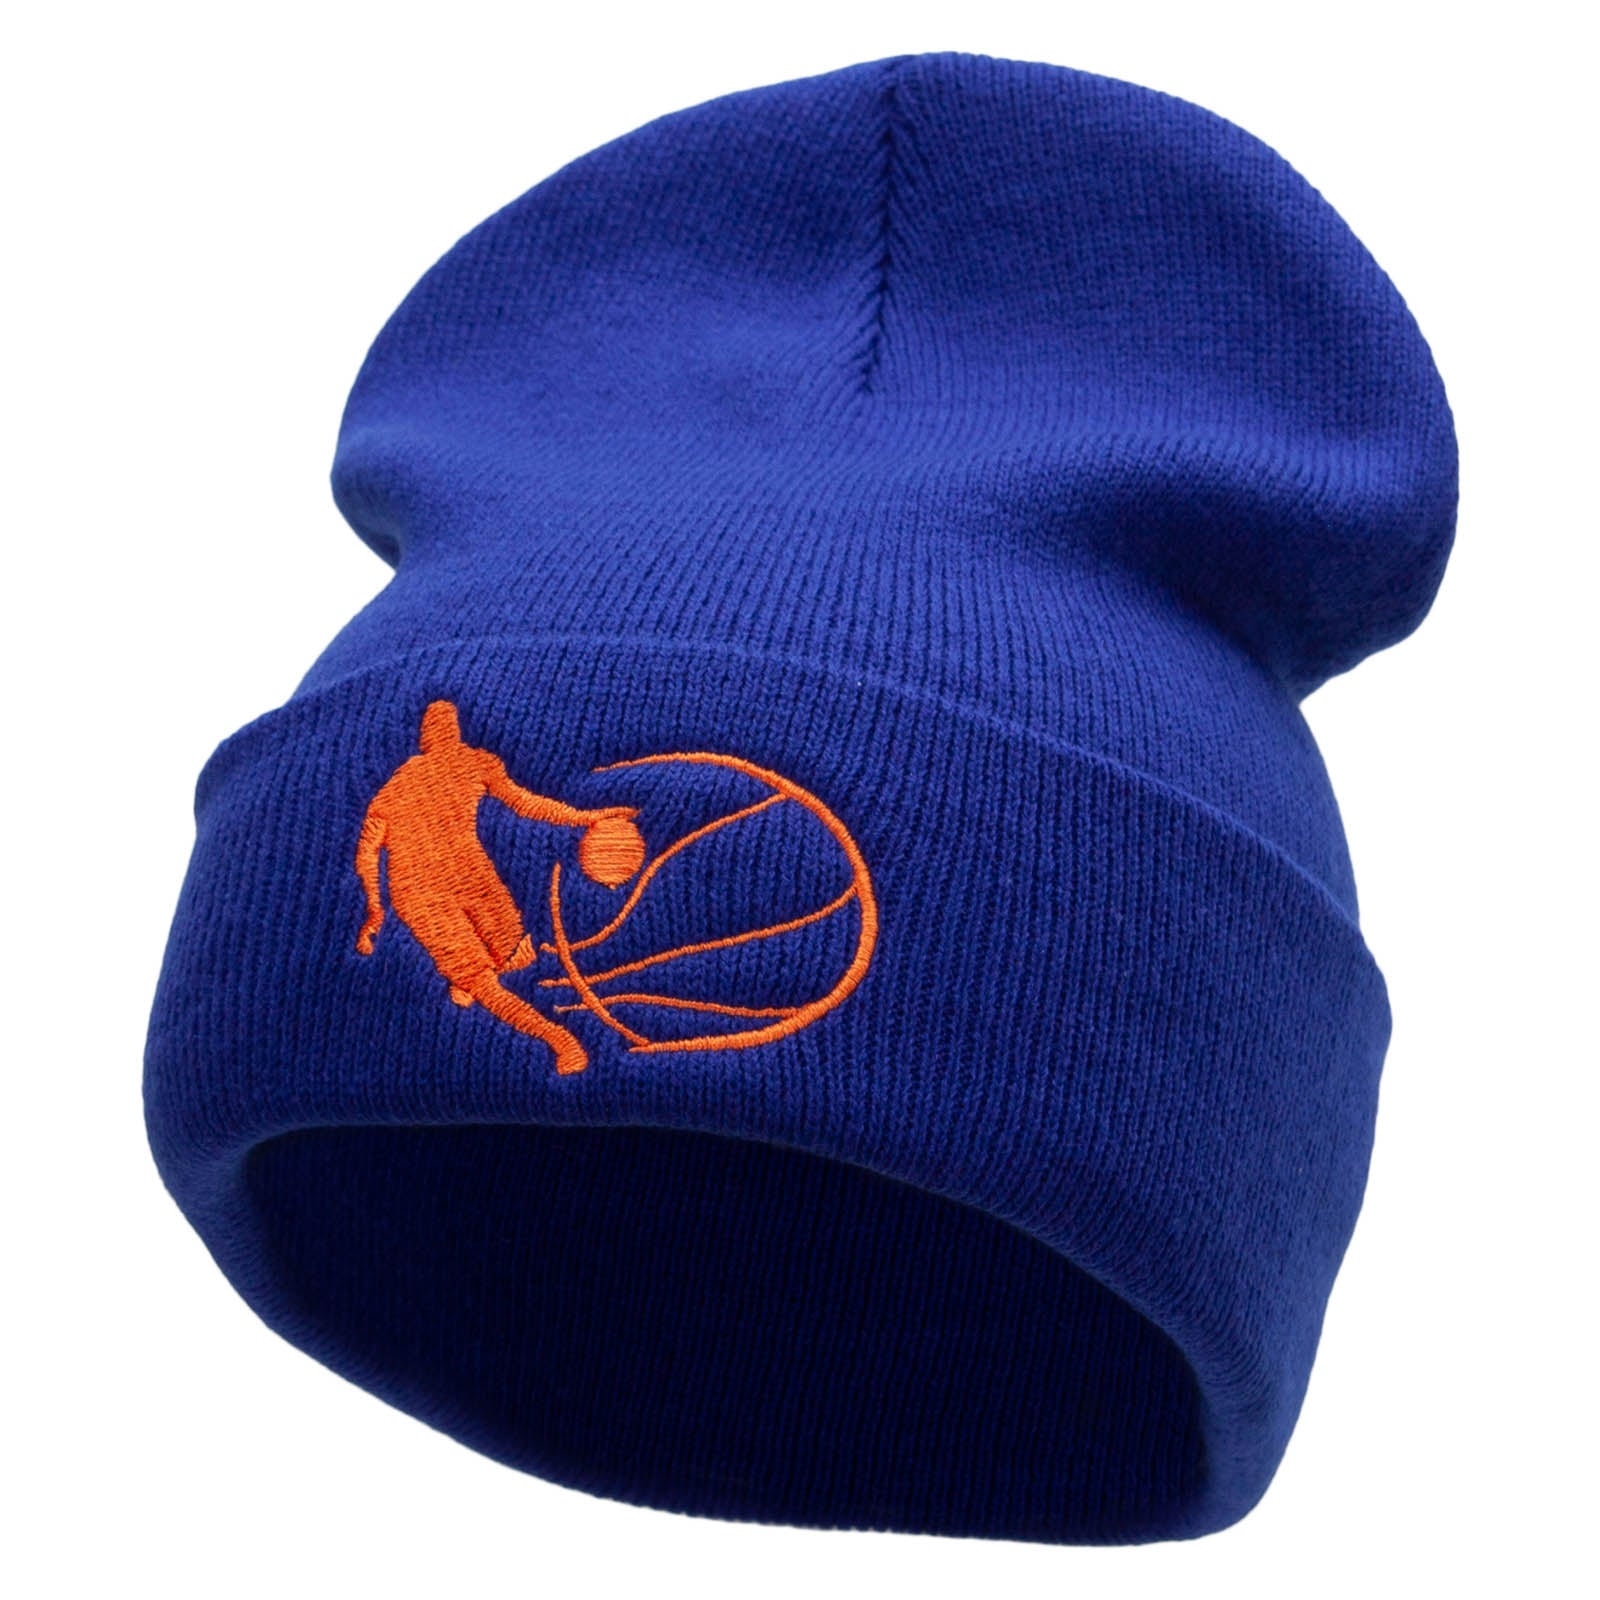 Basketball Dribble Embroidered 12 Inch Long Knitted Beanie - Royal OSFM